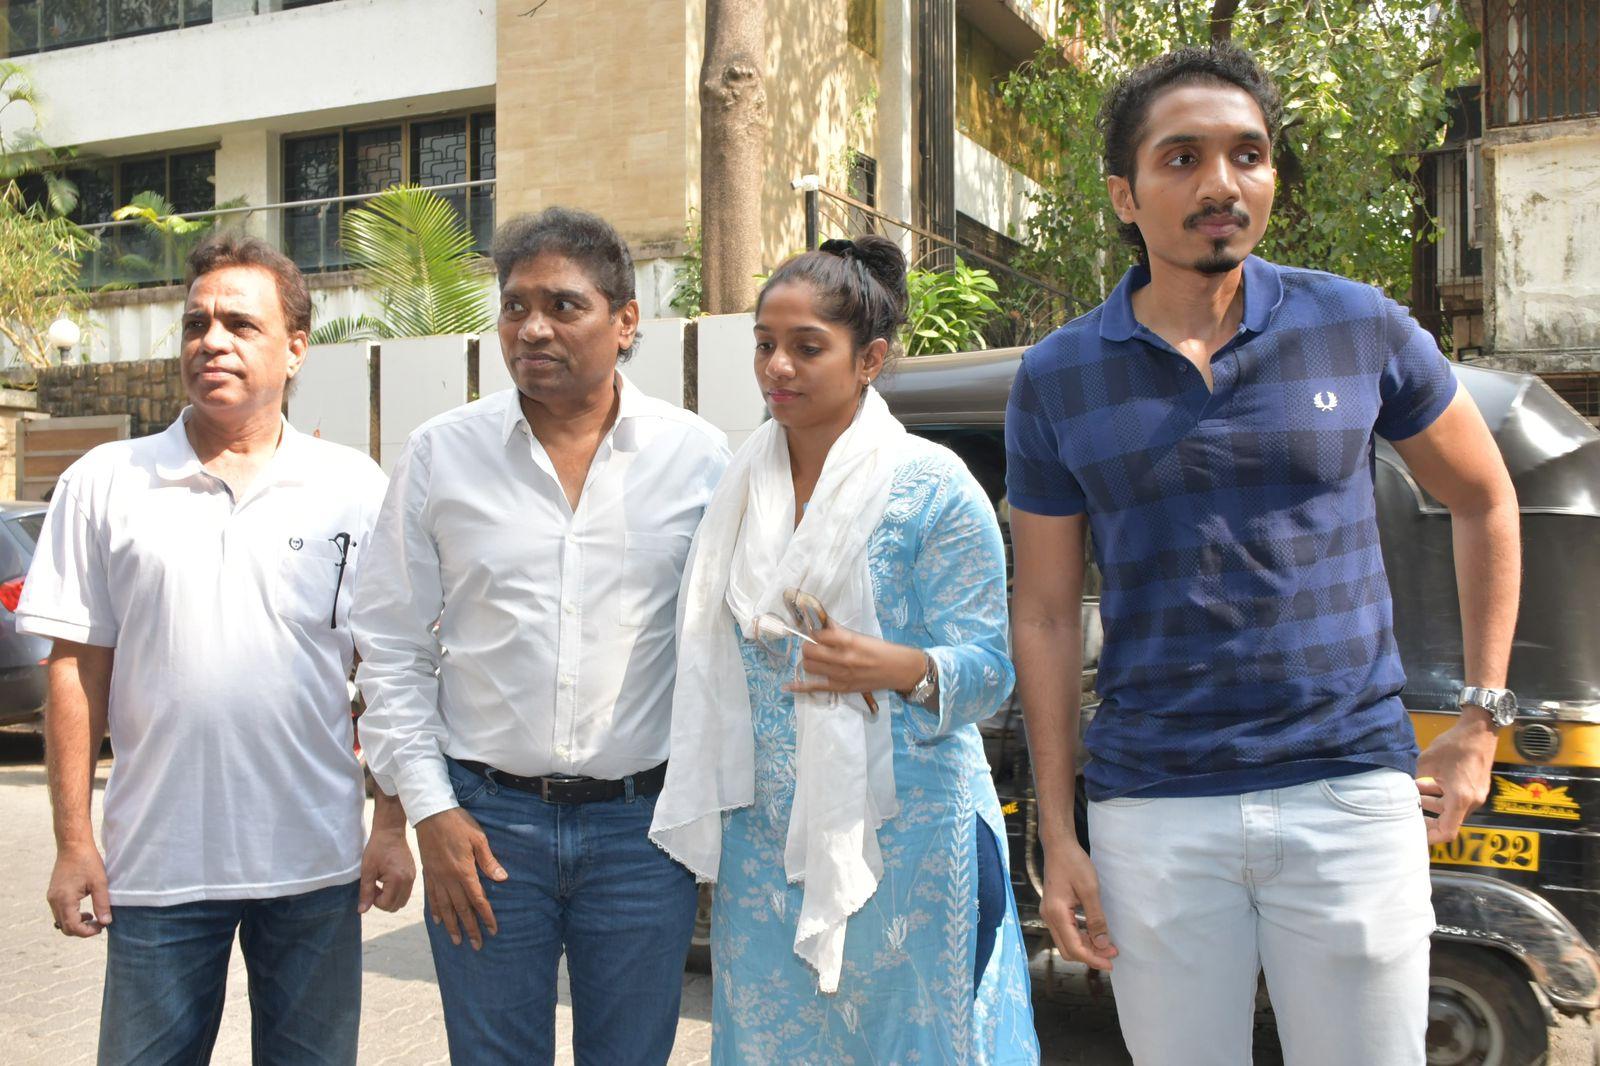 Johnny Lever's children, Jamie Lever, and Jessey Lever came along with their father to support him in his time of grief